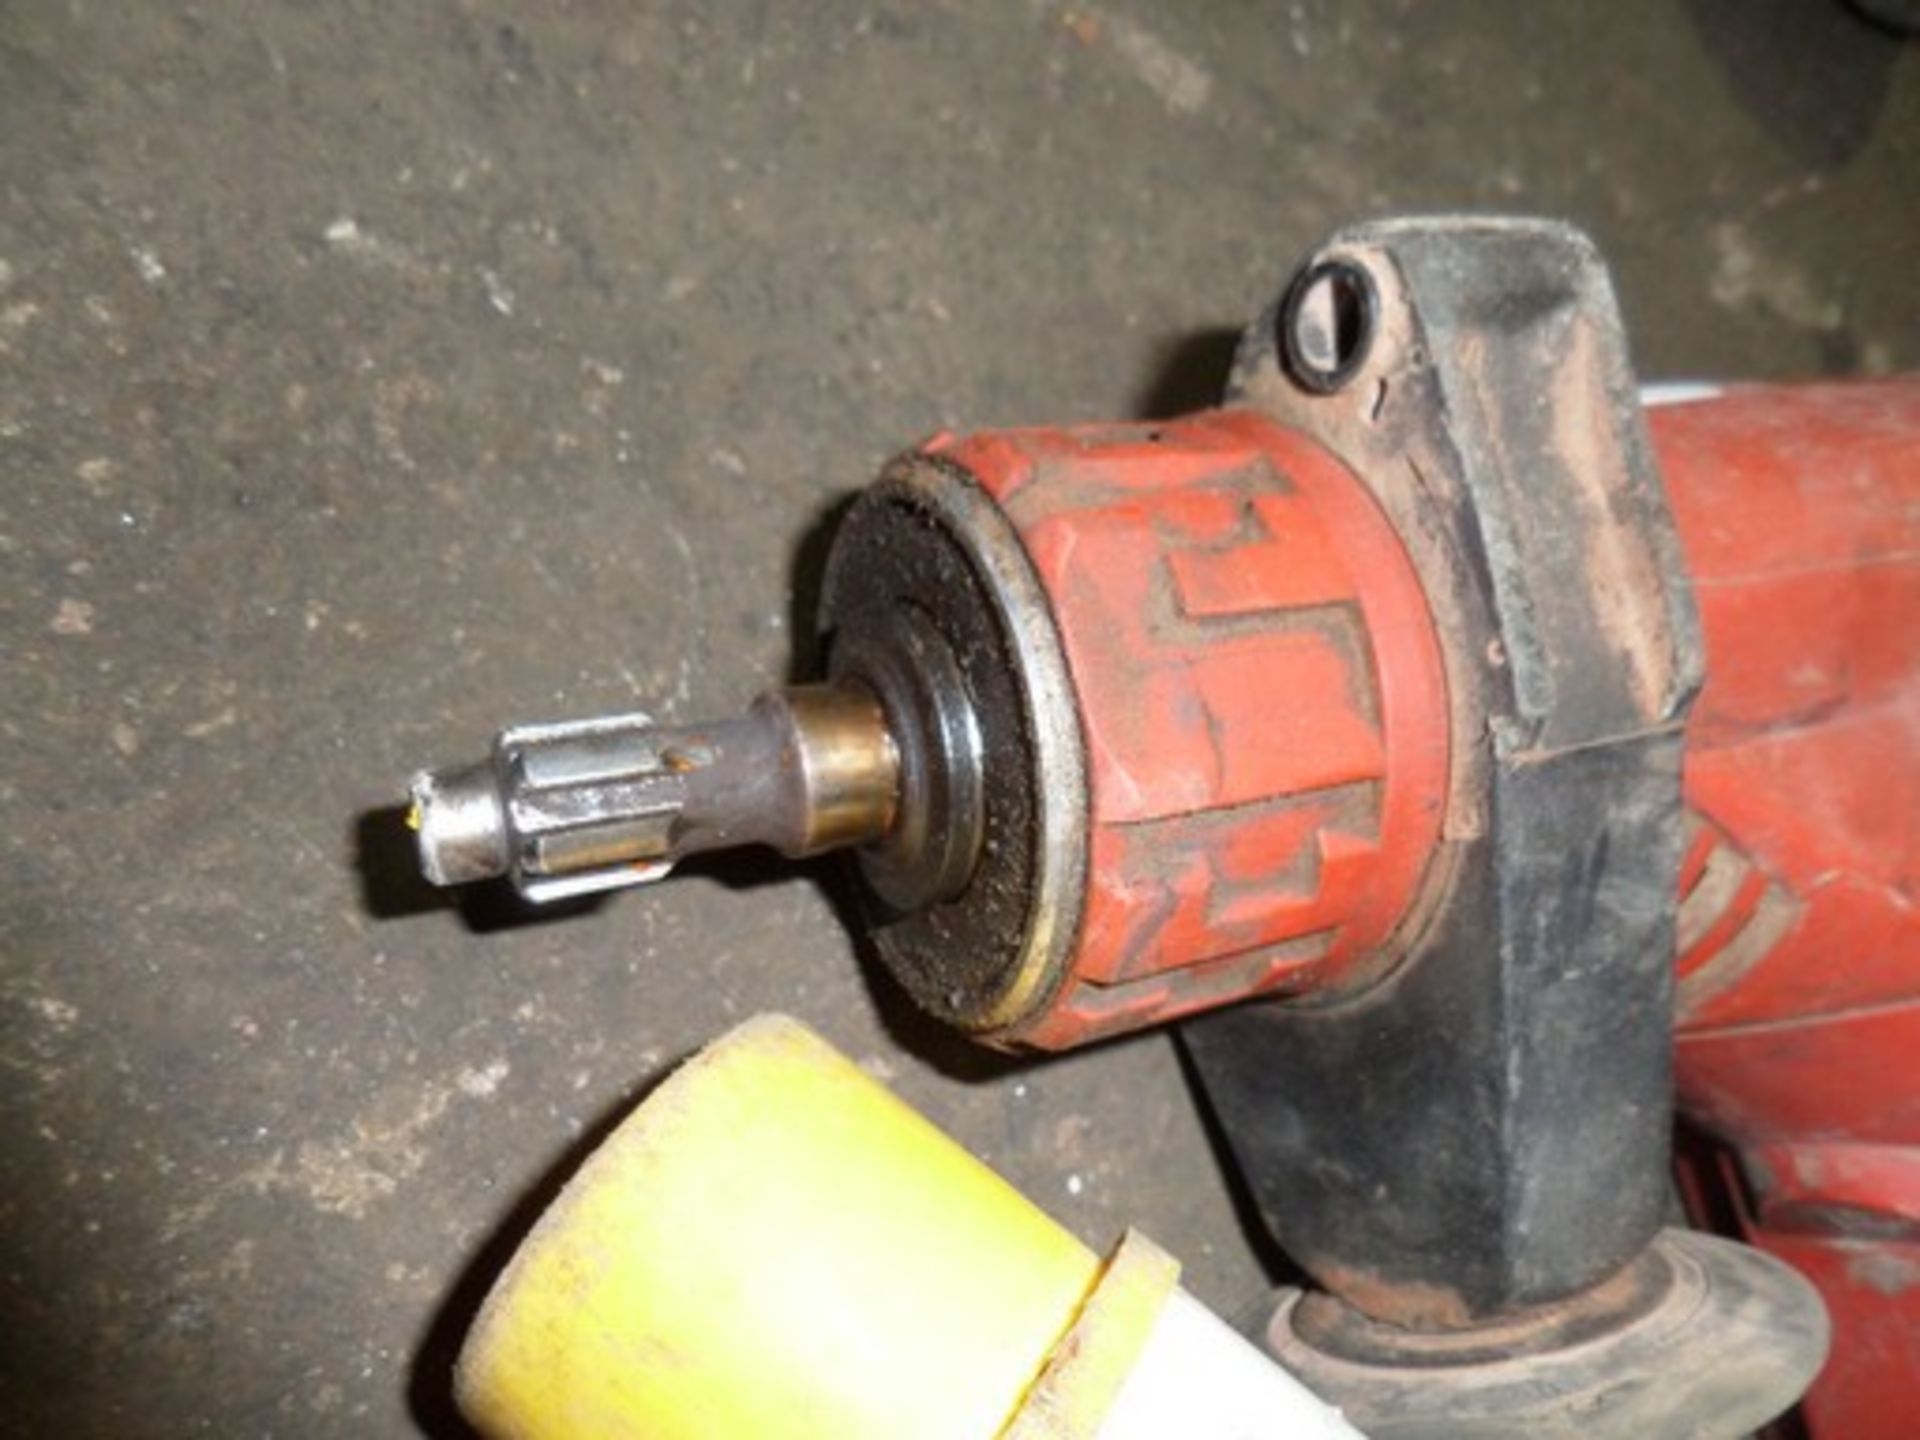 Hilti  {015205} HILTI TE40 HAMMER DRILLER 1120v 16amp connection and power is there when tested - Image 2 of 2